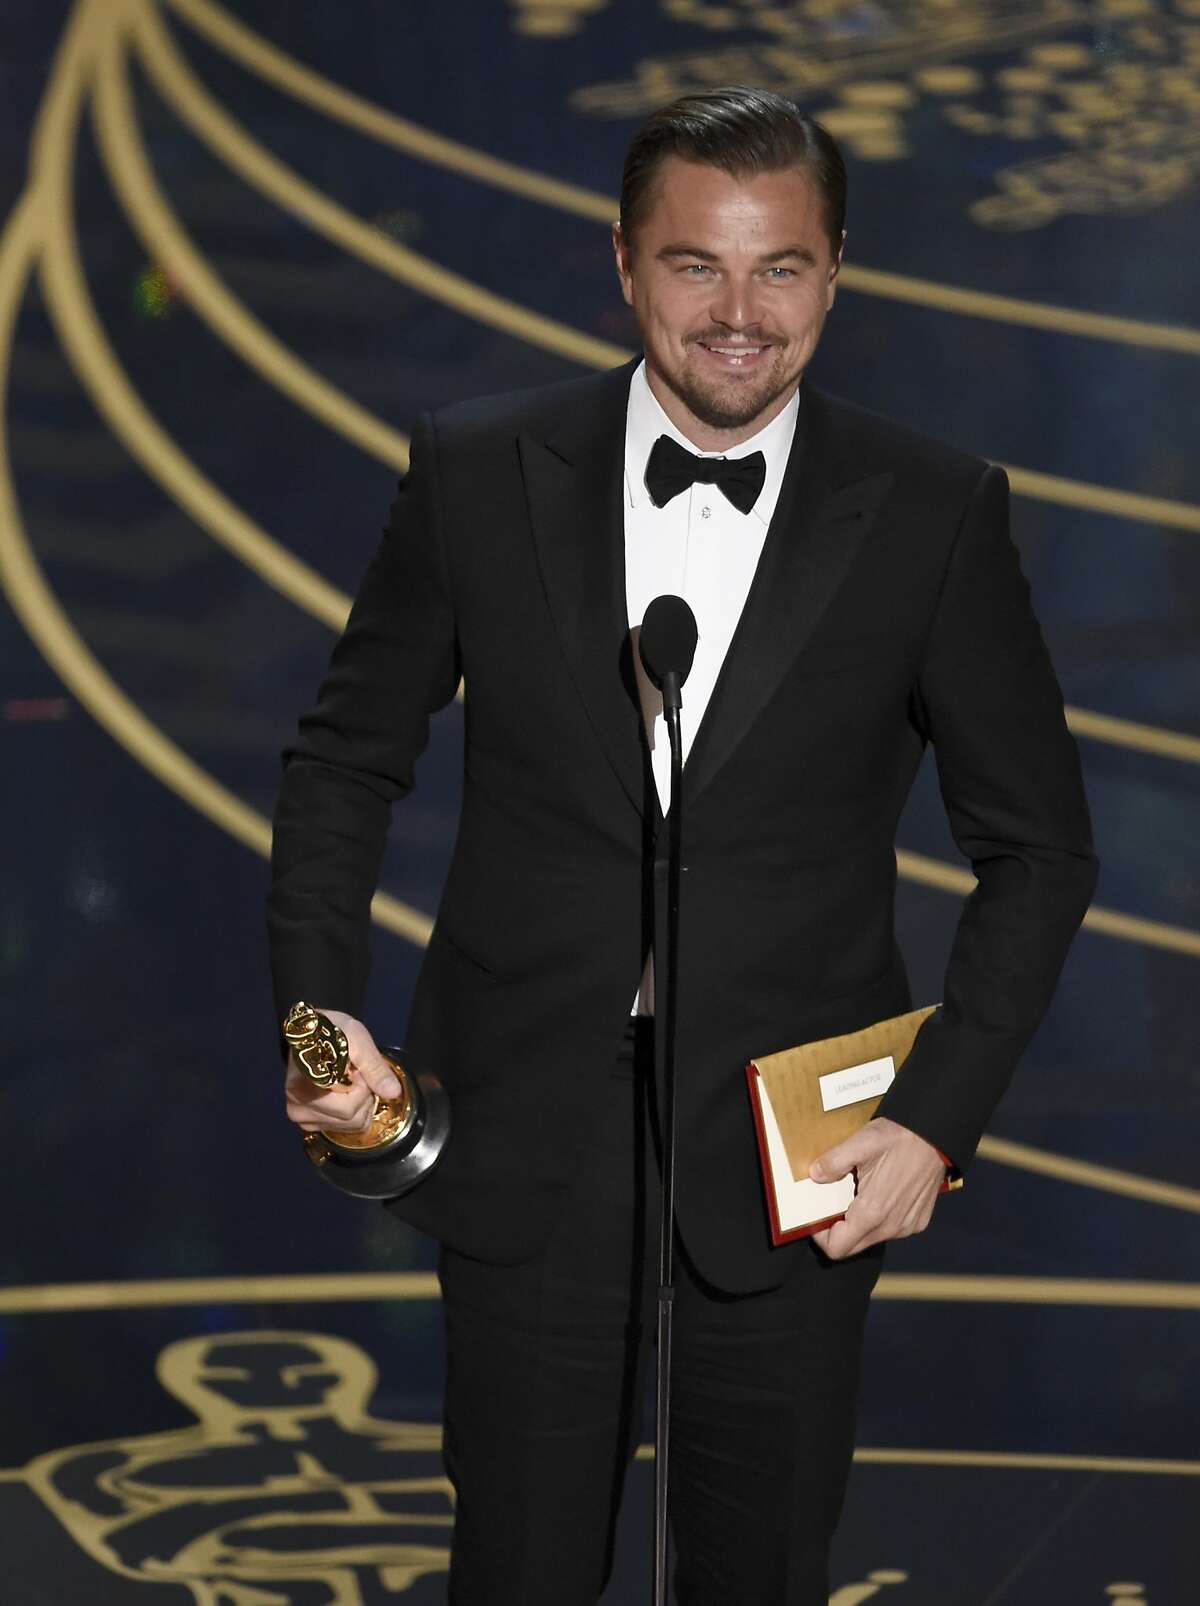 Leonardo DiCaprio accepts the award for best actor in a leading role for “The Revenant” at the Oscars on Sunday, Feb. 28, 2016, at the Dolby Theatre in Los Angeles.